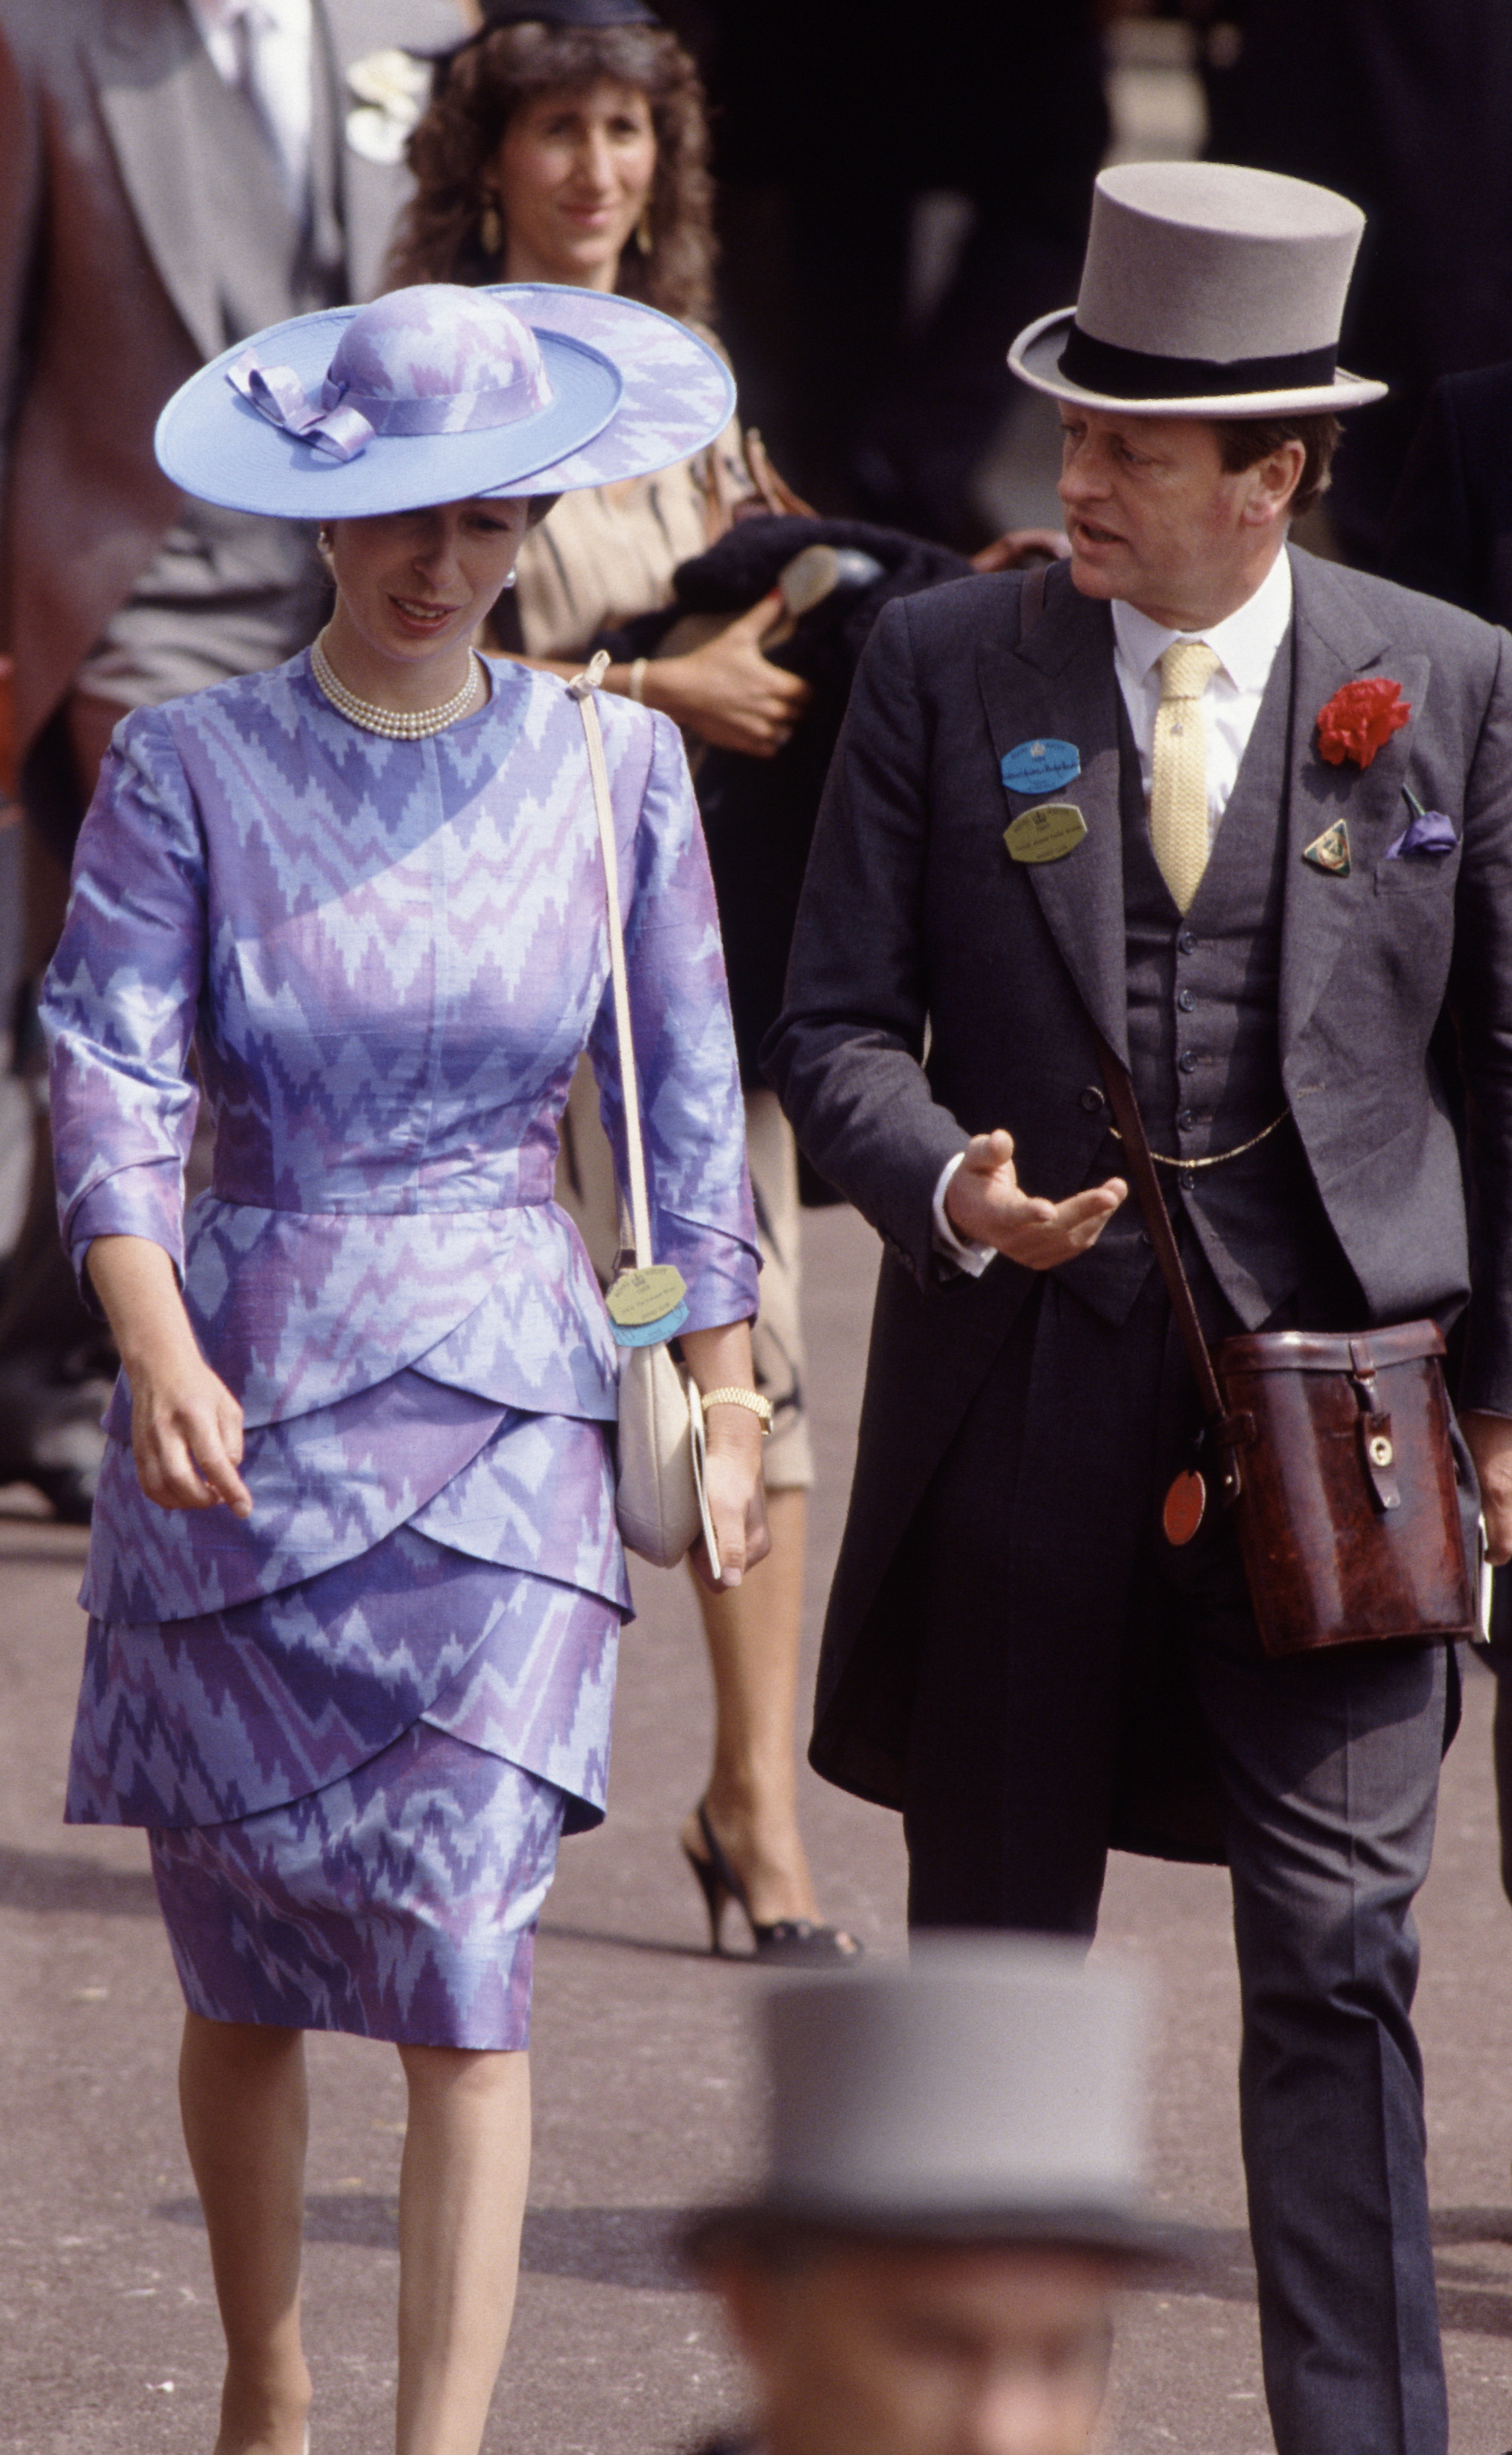 Princess Anne and the boy's father at the Royal Ascot on June 22, 1989. | Source: Getty Images